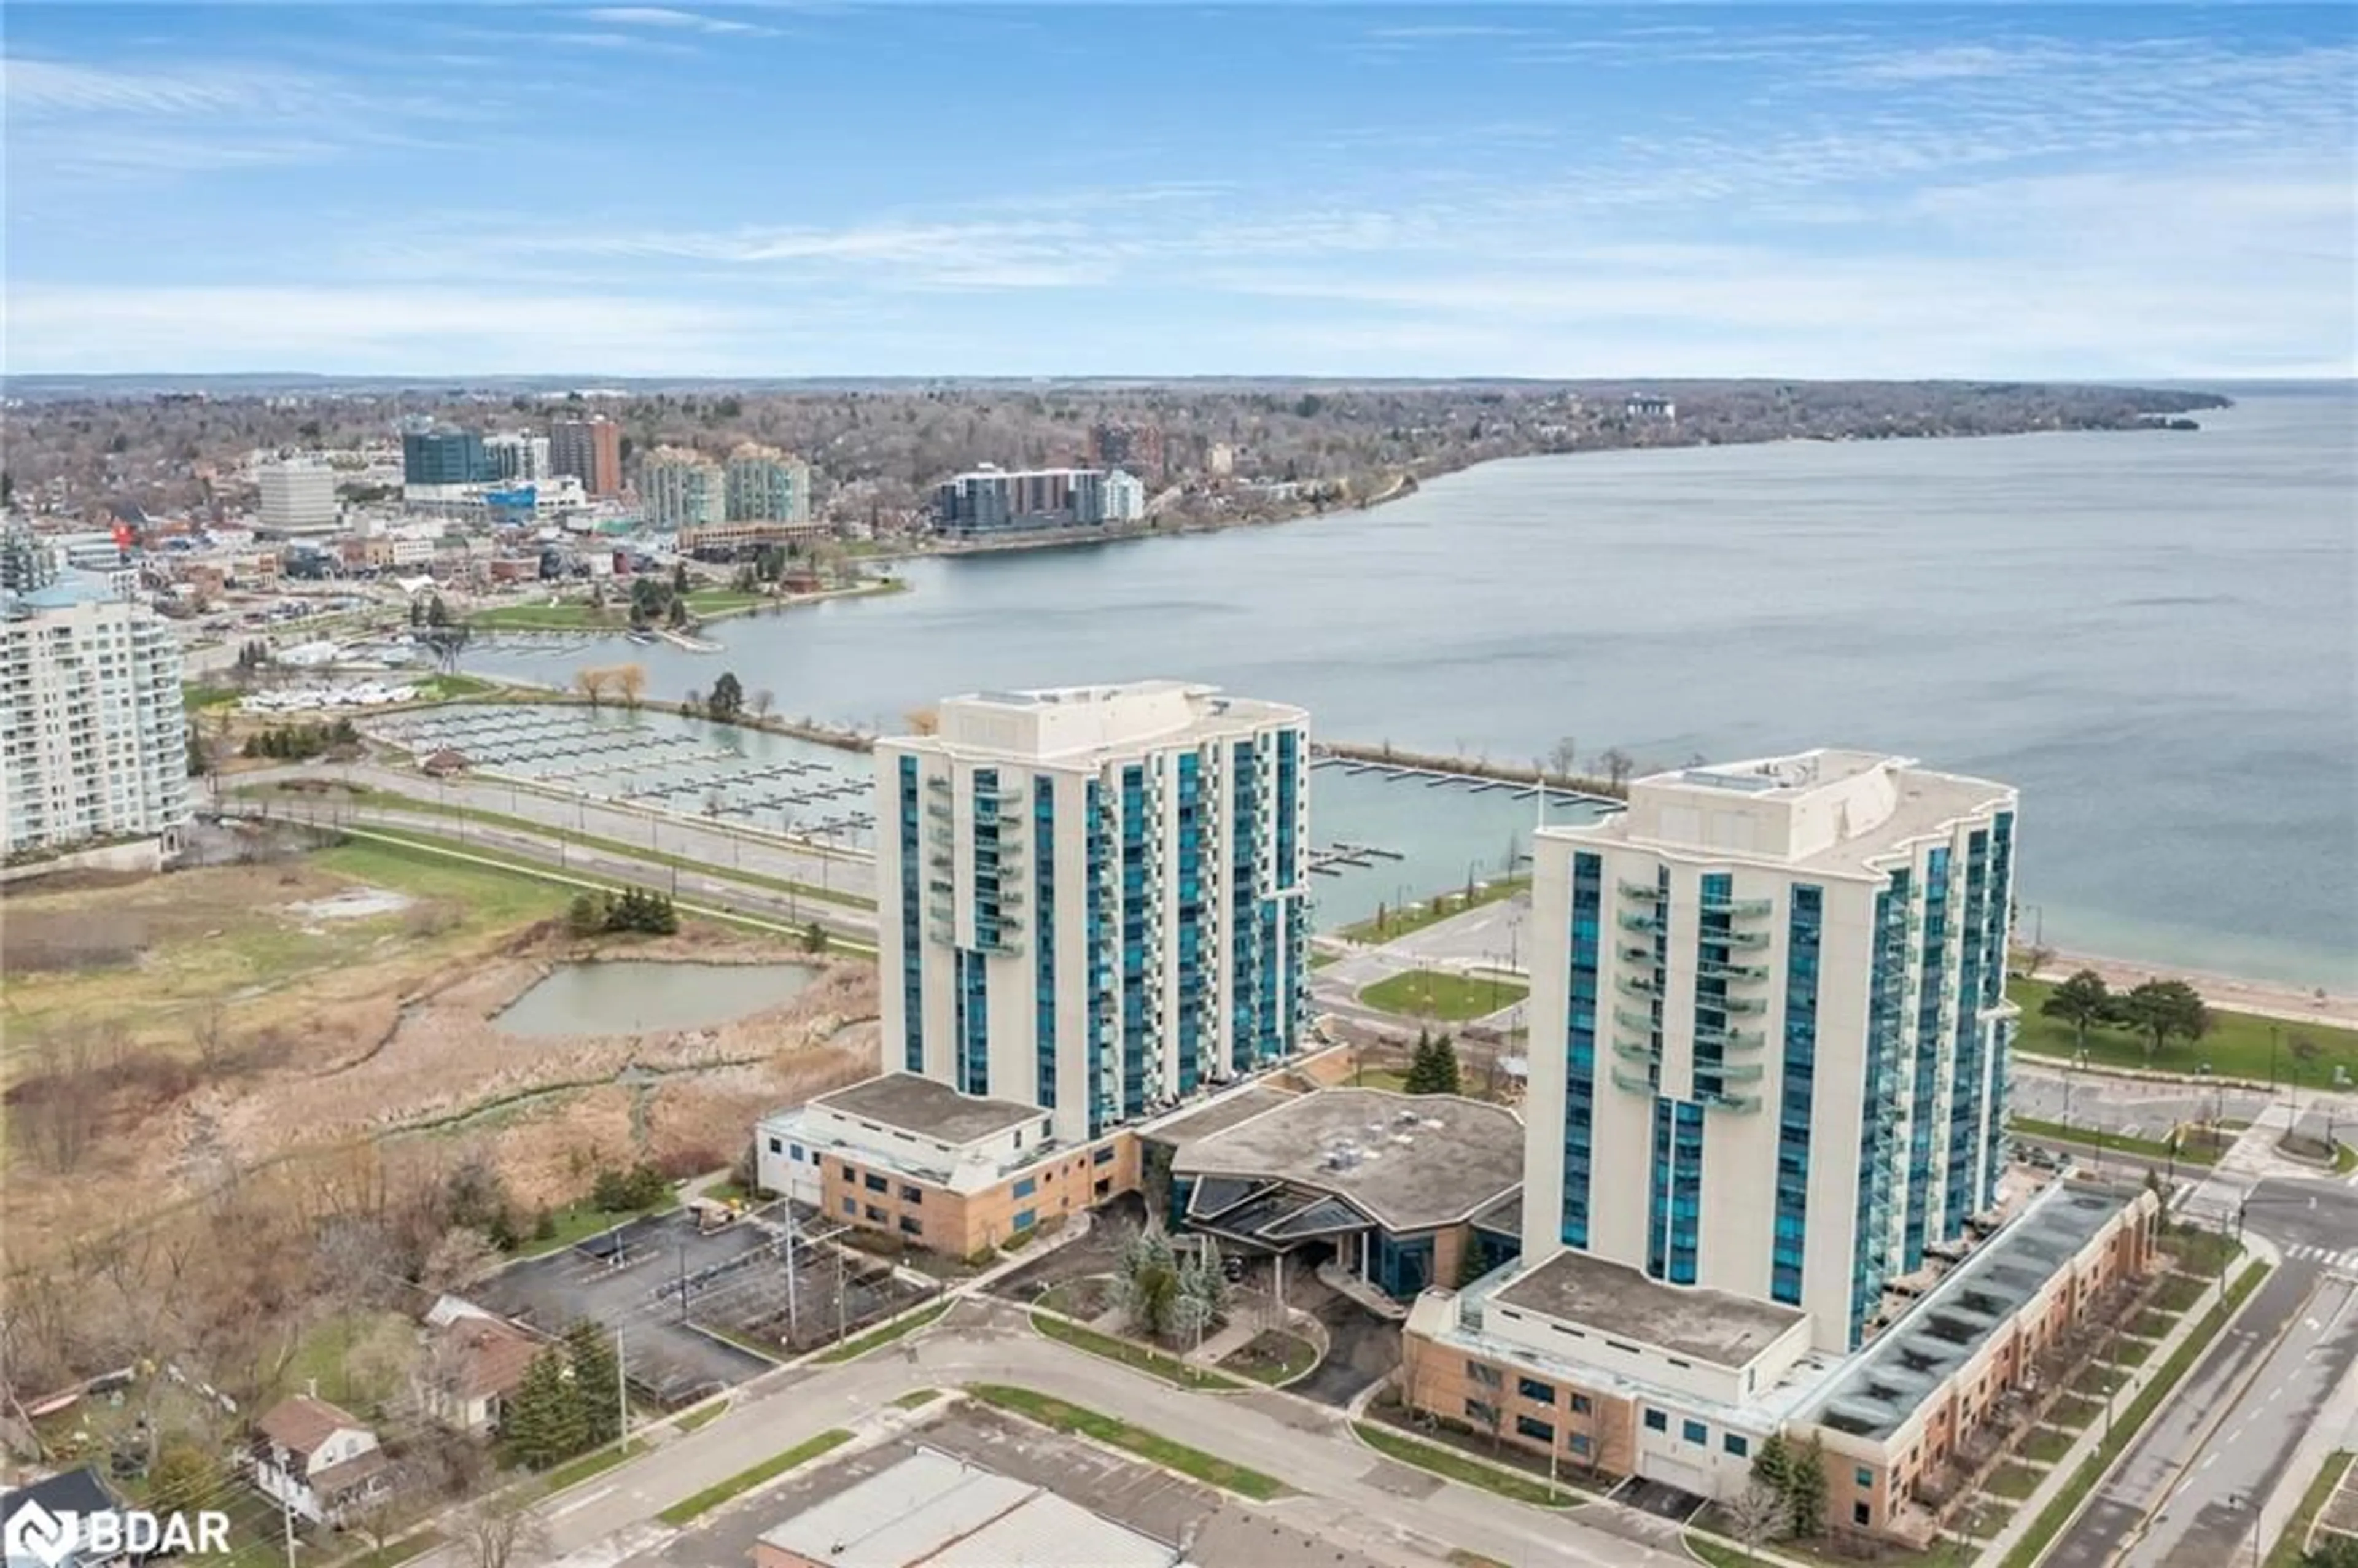 Lakeview for 33 Ellen St #907, Barrie Ontario L4N 6E9